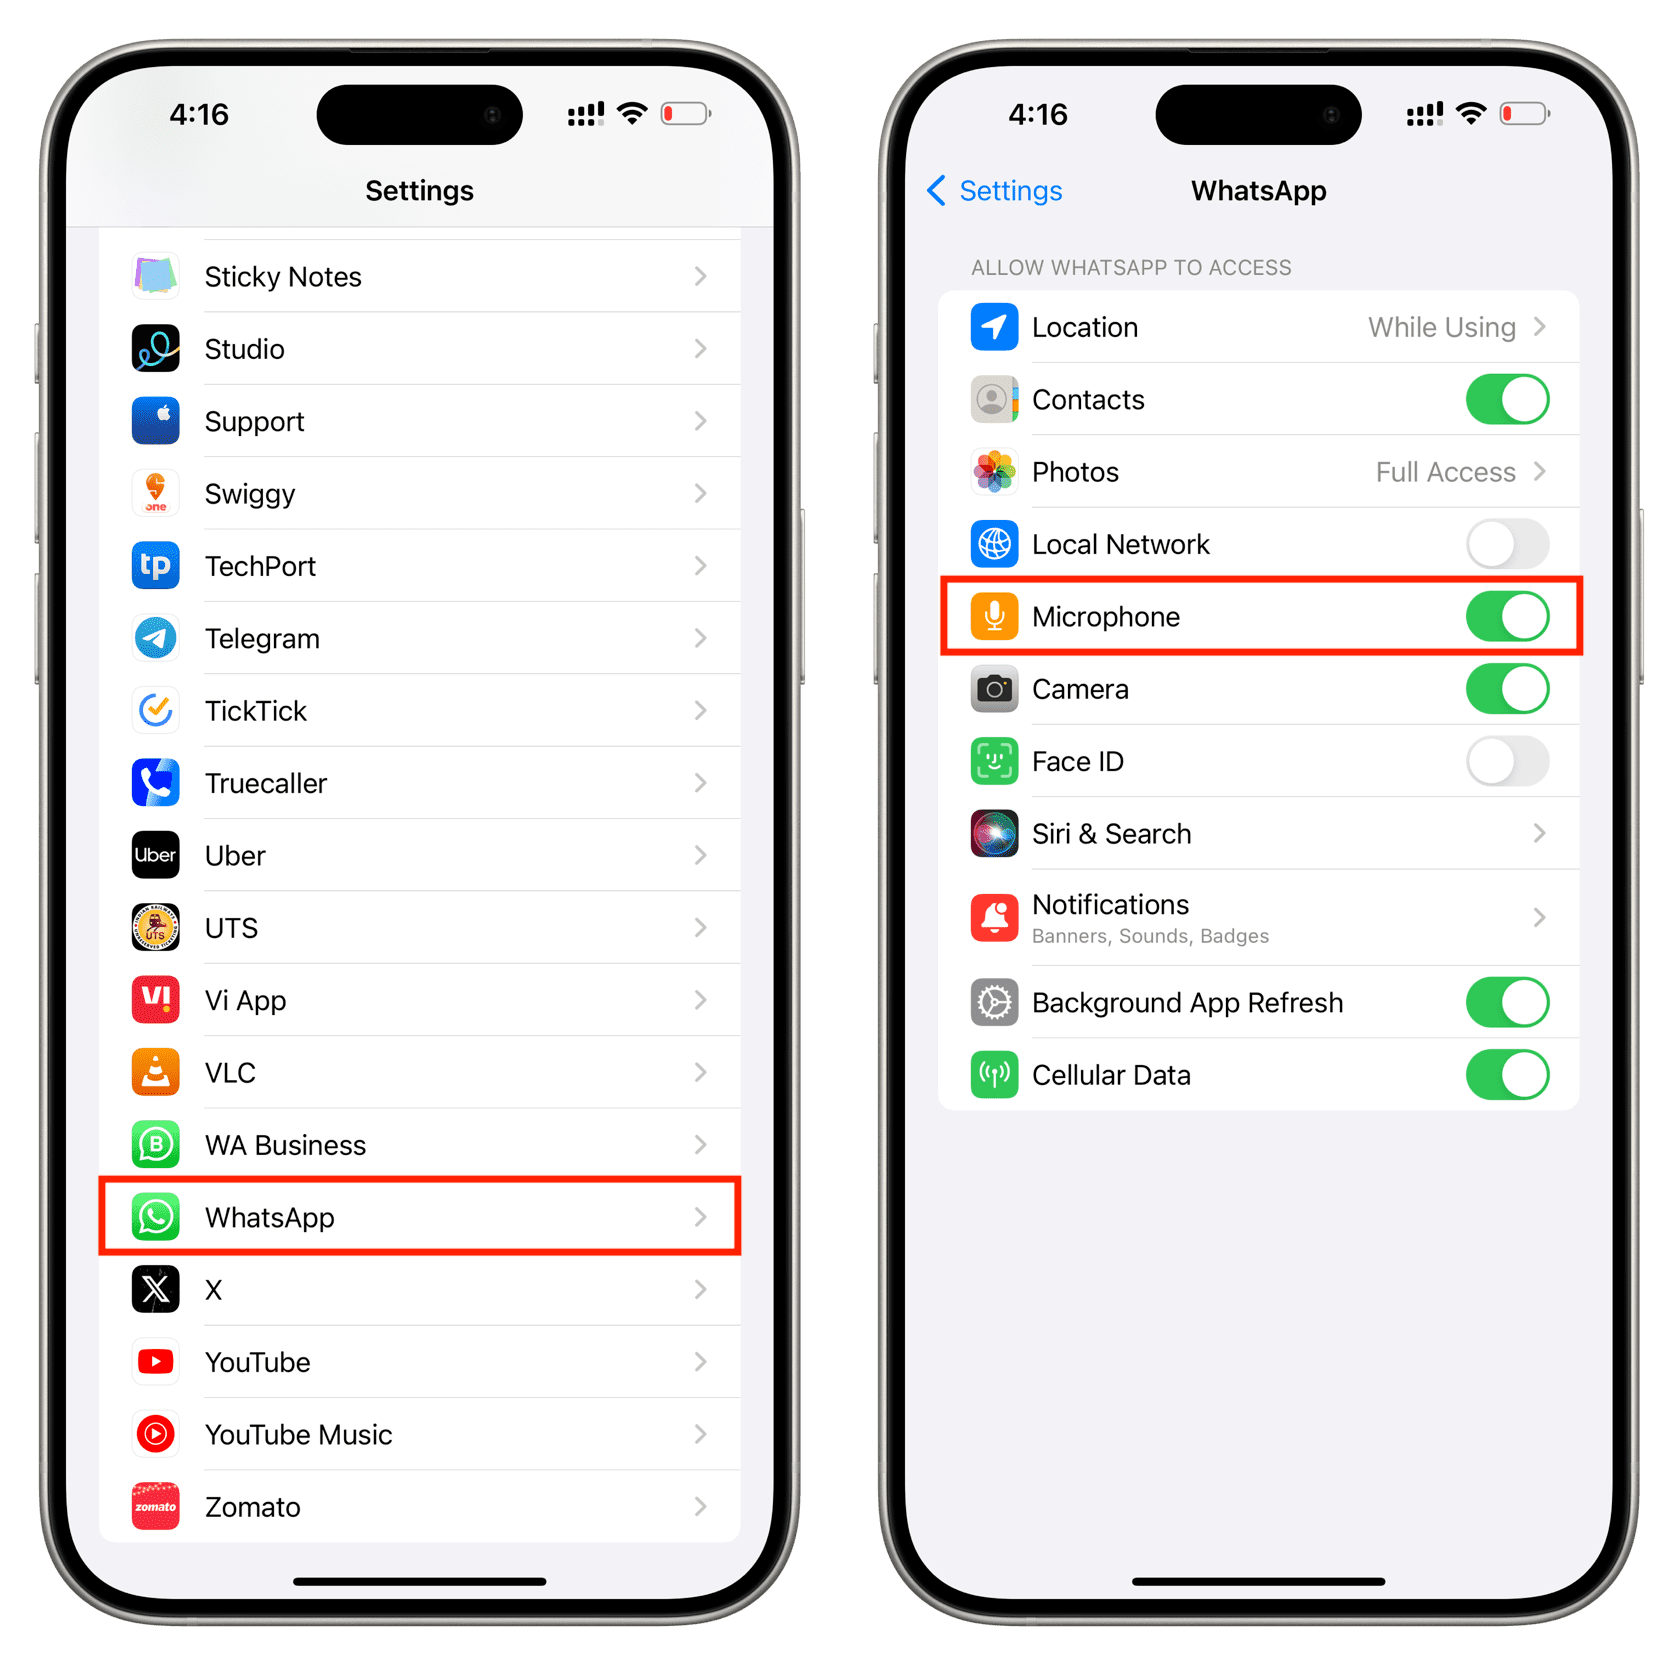 Microphone option for WhatsApp in iPhone Settings